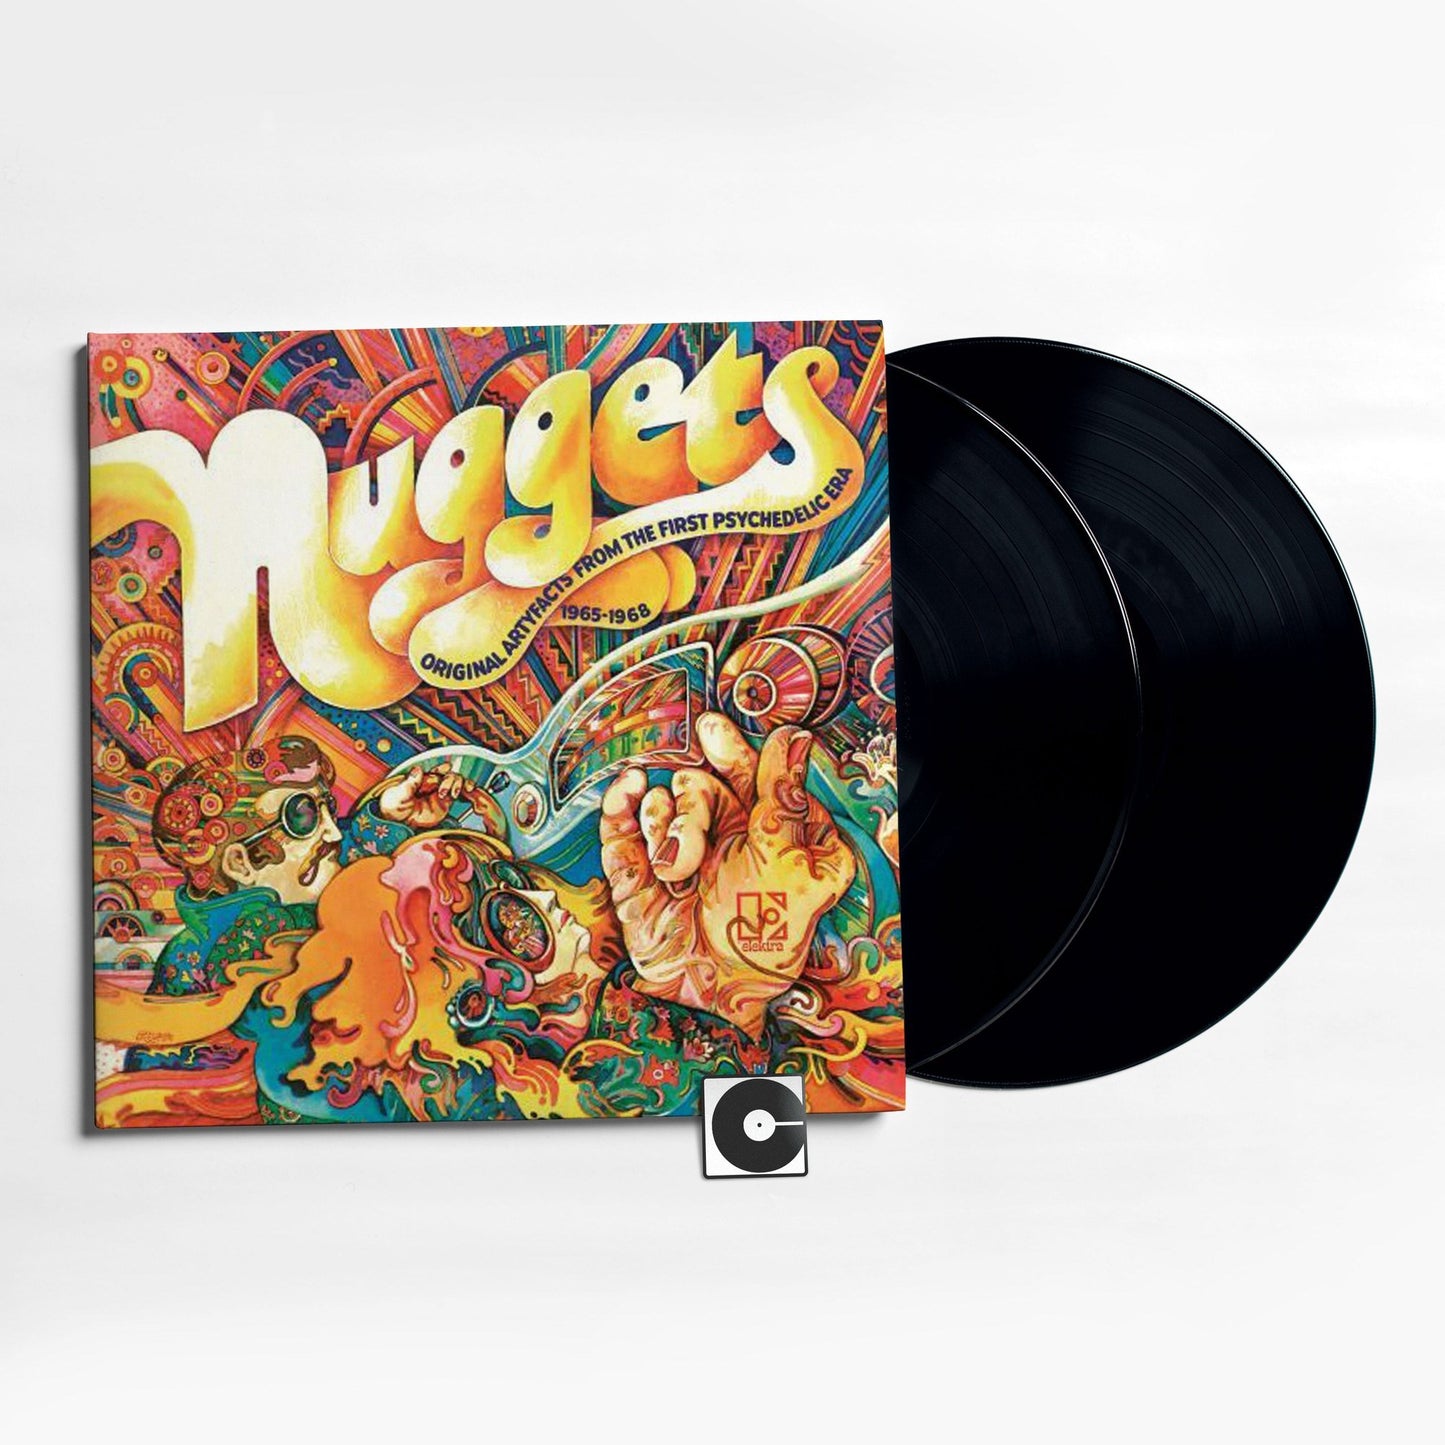 Various Artists - "Nuggets: Original Artyfacts from the First Psychedelic Era"